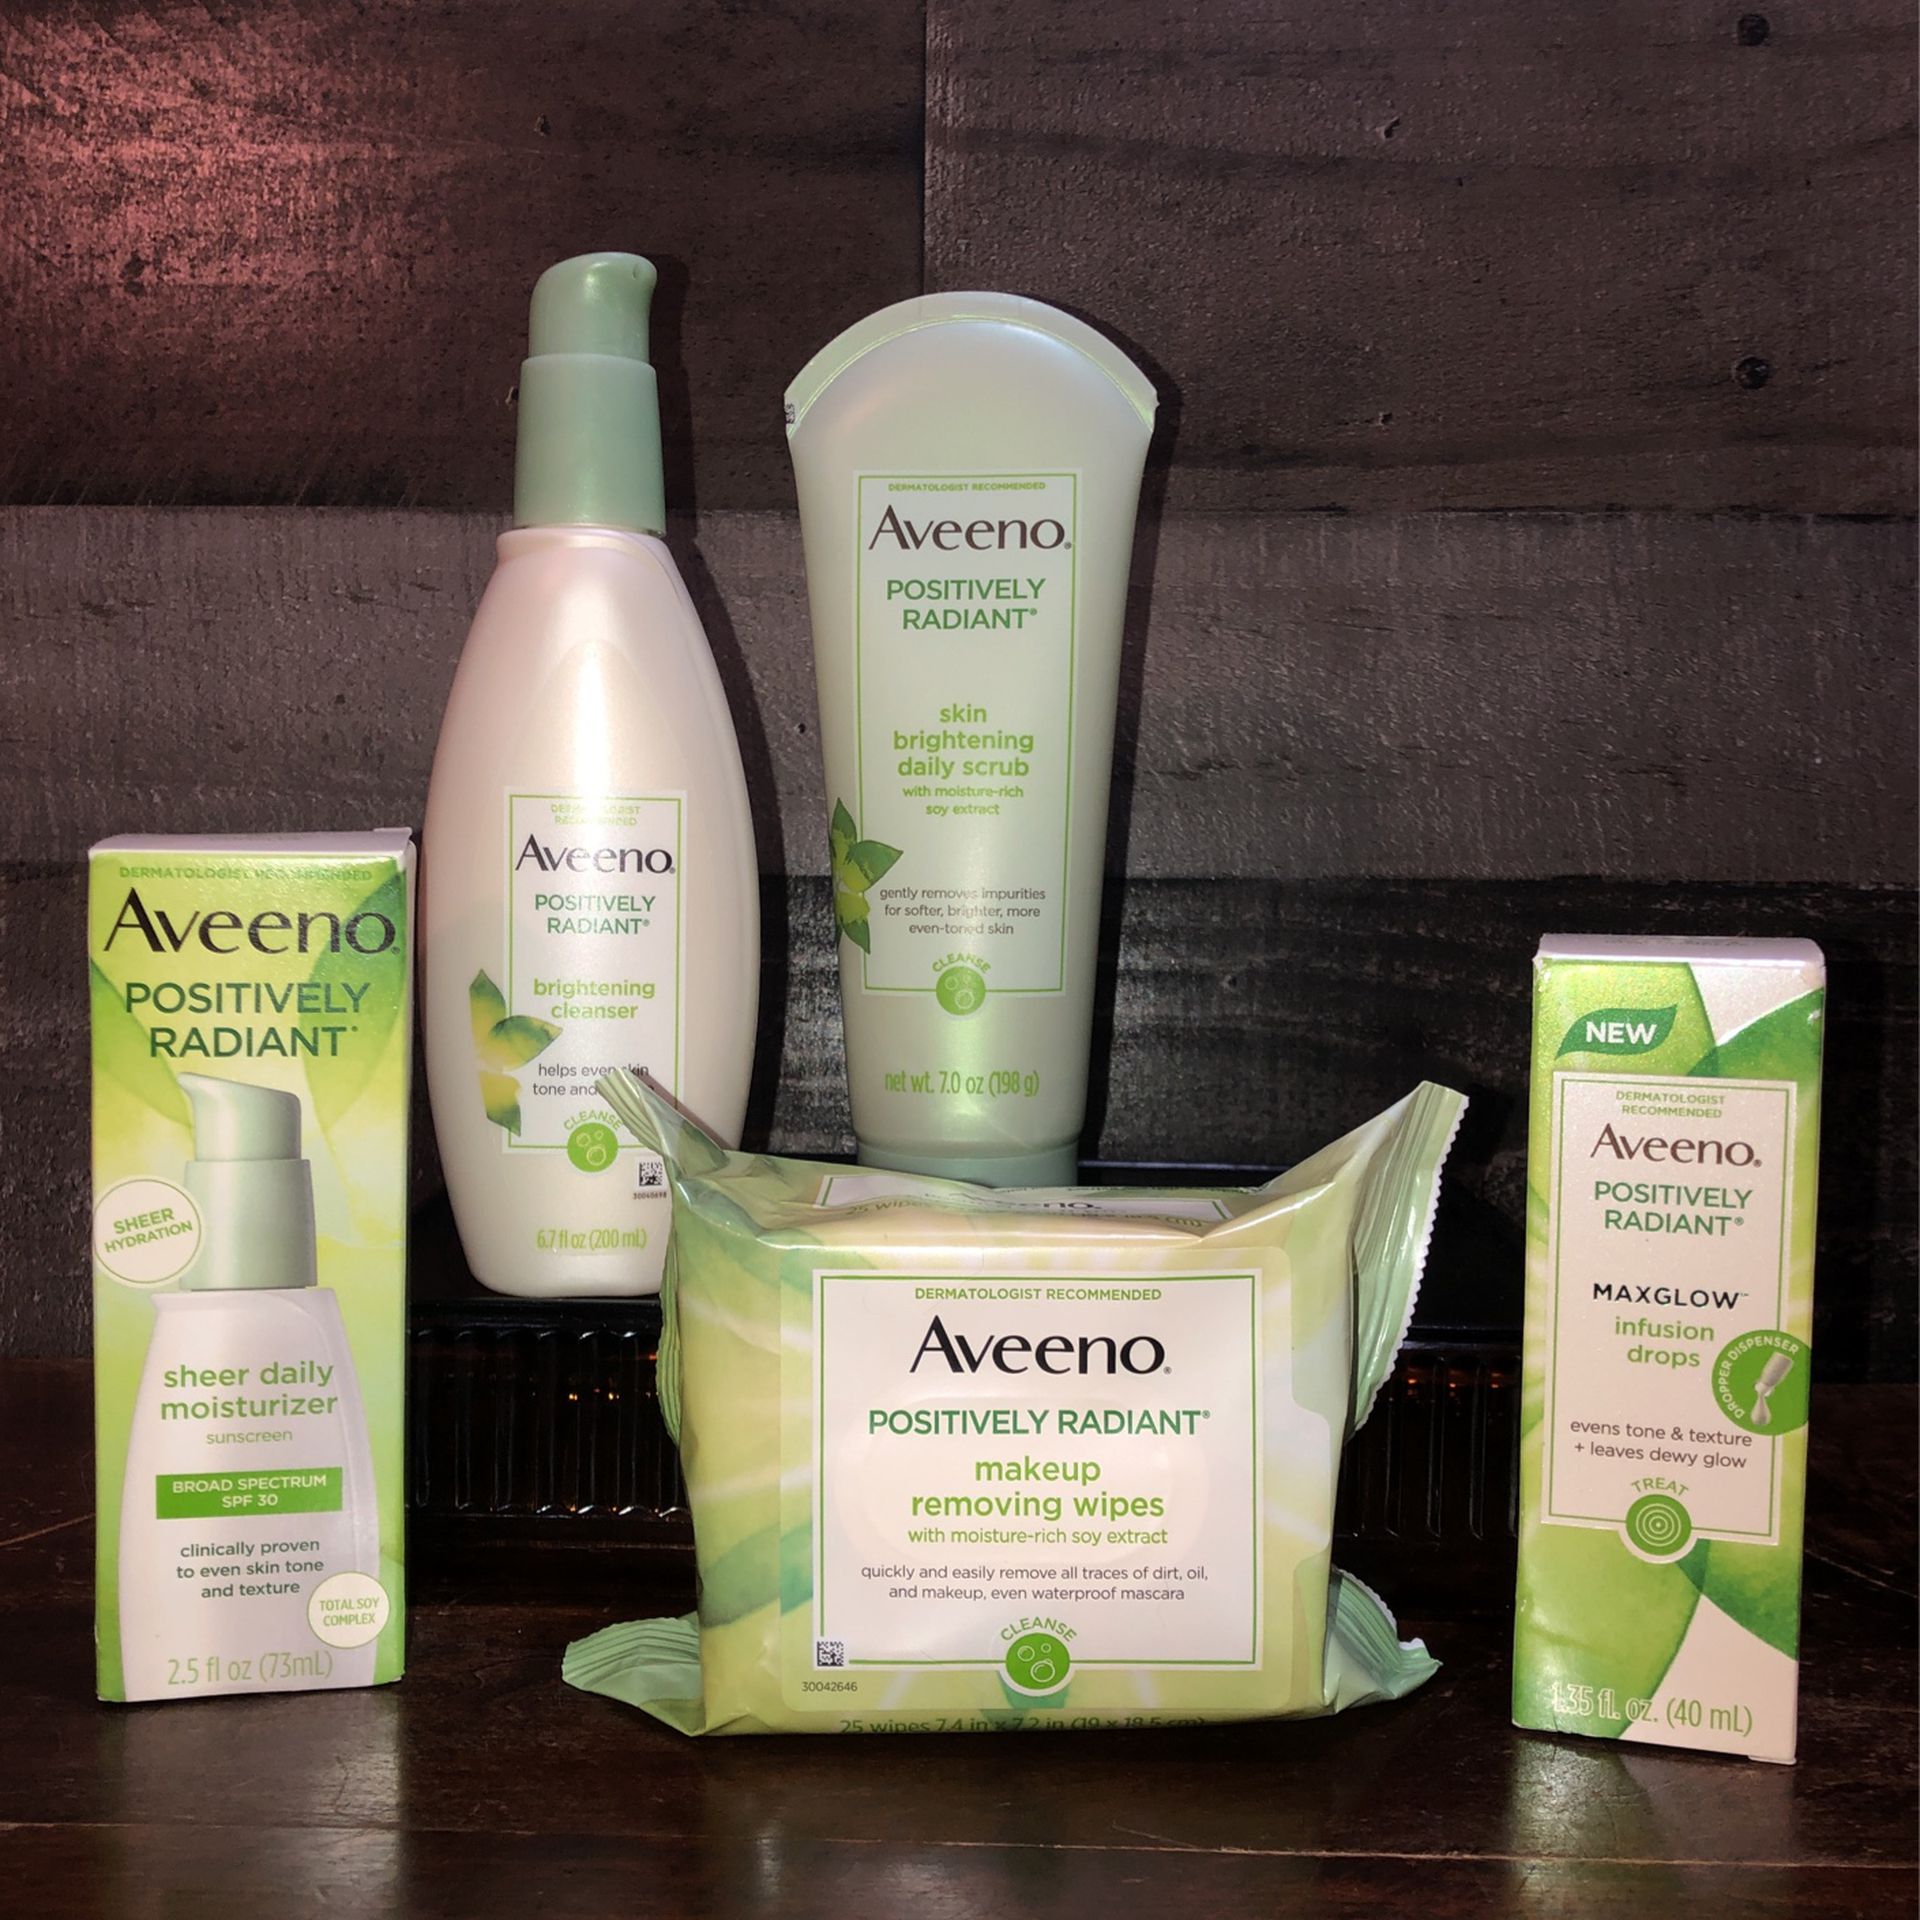 All Brand NEW!!! 🍃   Aveeno brand Facial Care Products - Positively Radiant (((PENDING PICK UP TODAY 5-6pm)))